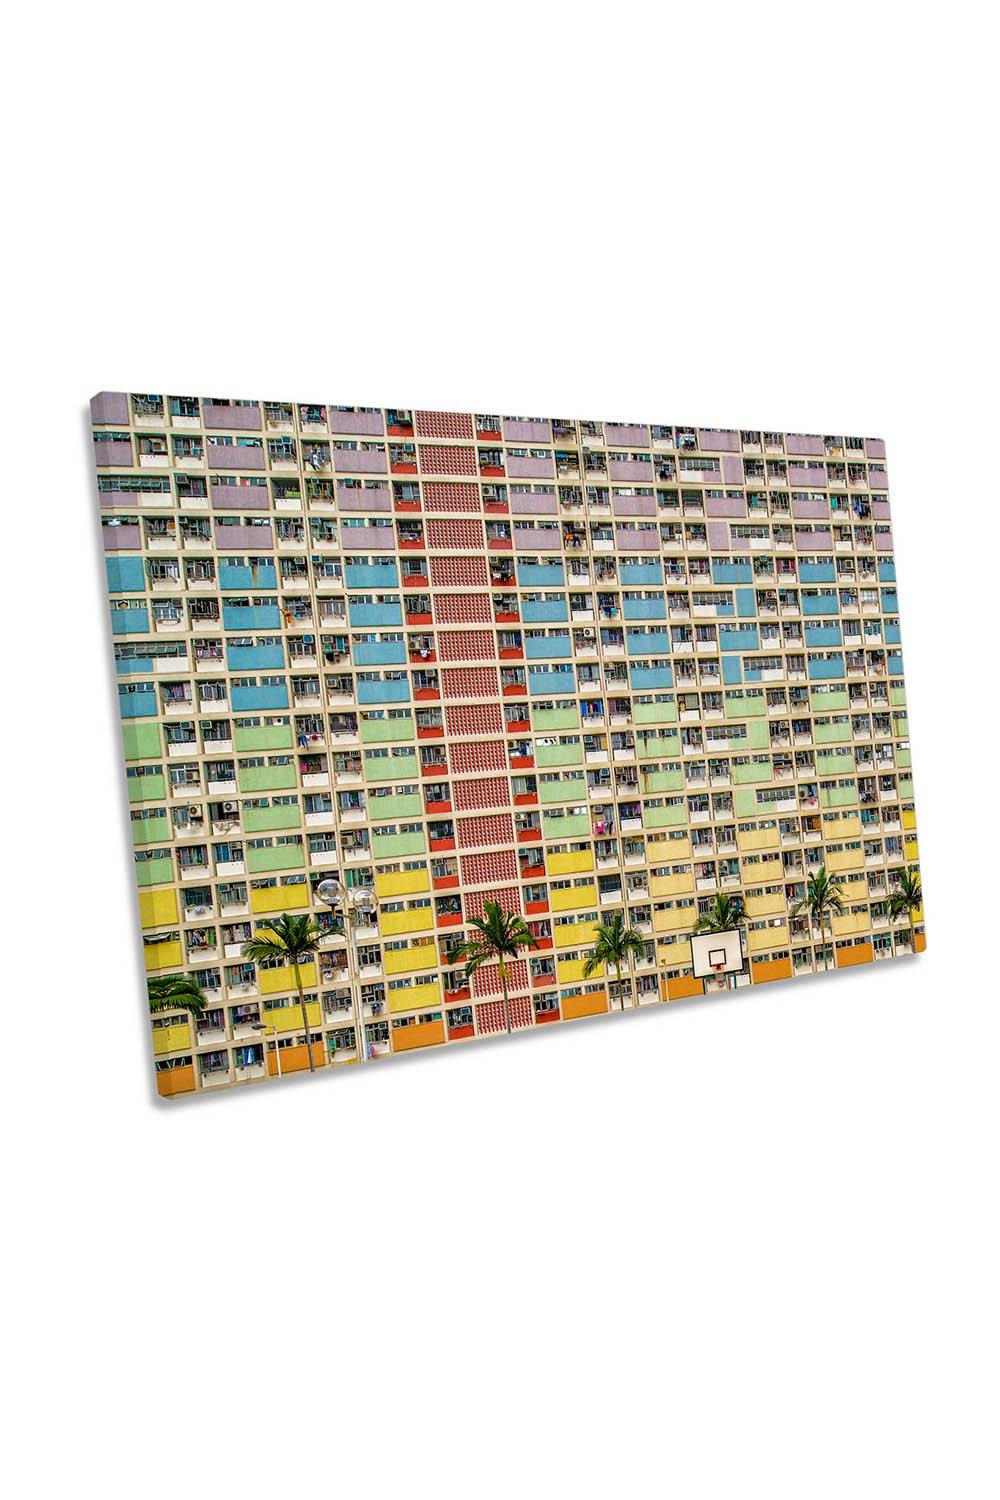 Equalizer Hong Kong Architecture City Canvas Wall Art Picture Print